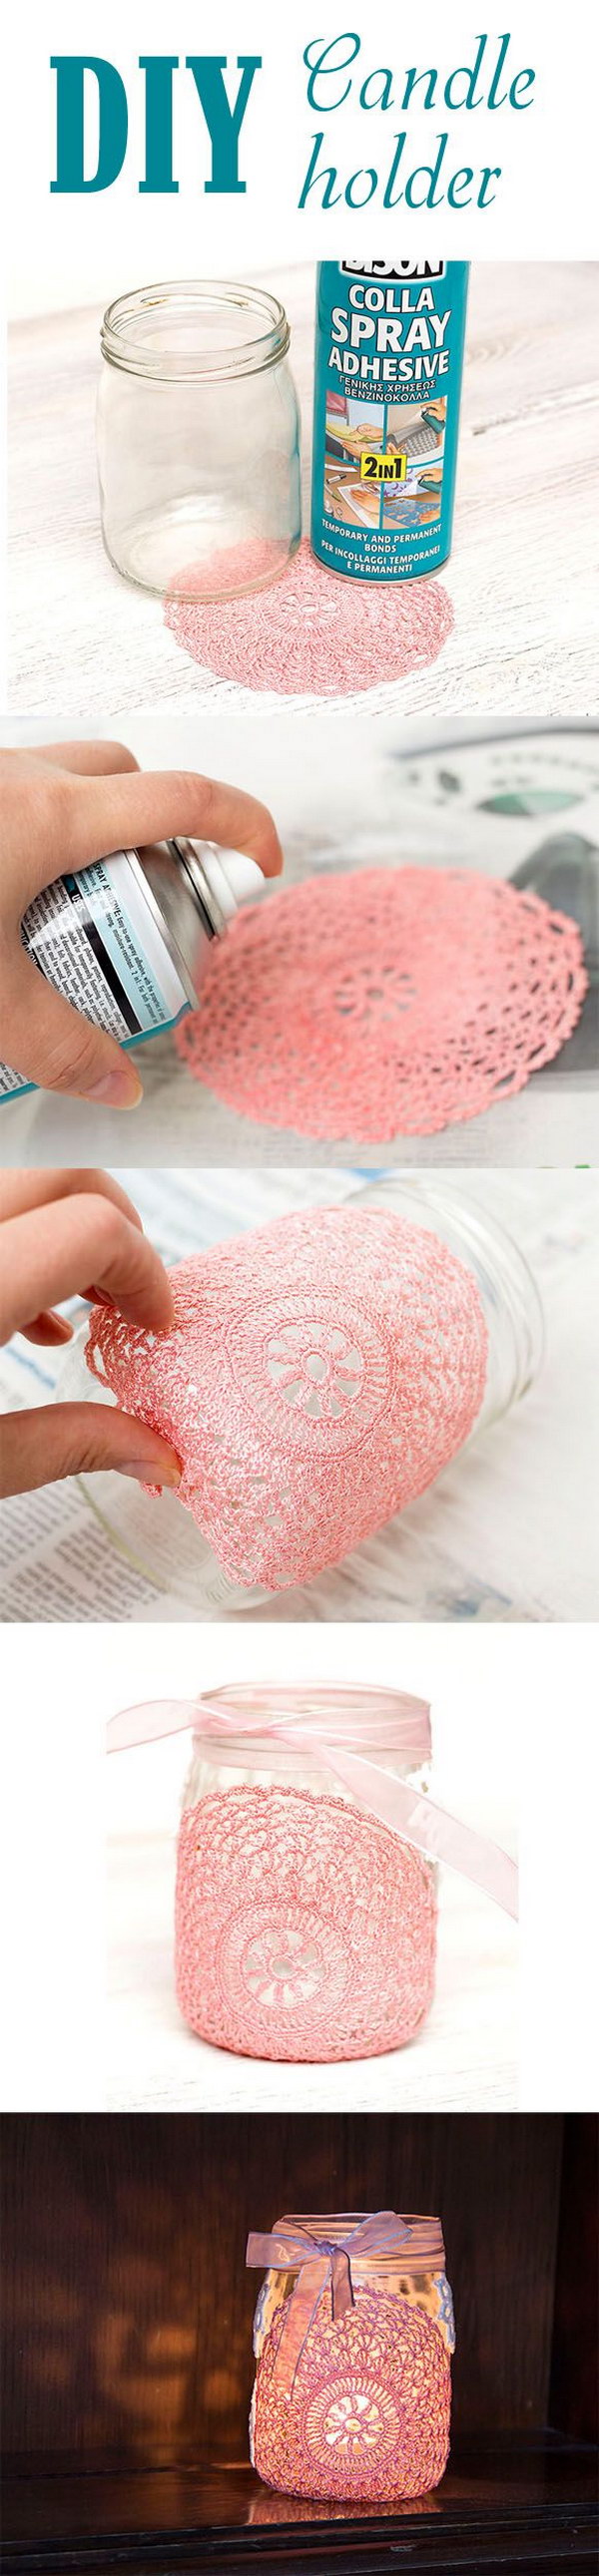 DIY Candle Holder from Glass Jar and Doilies 